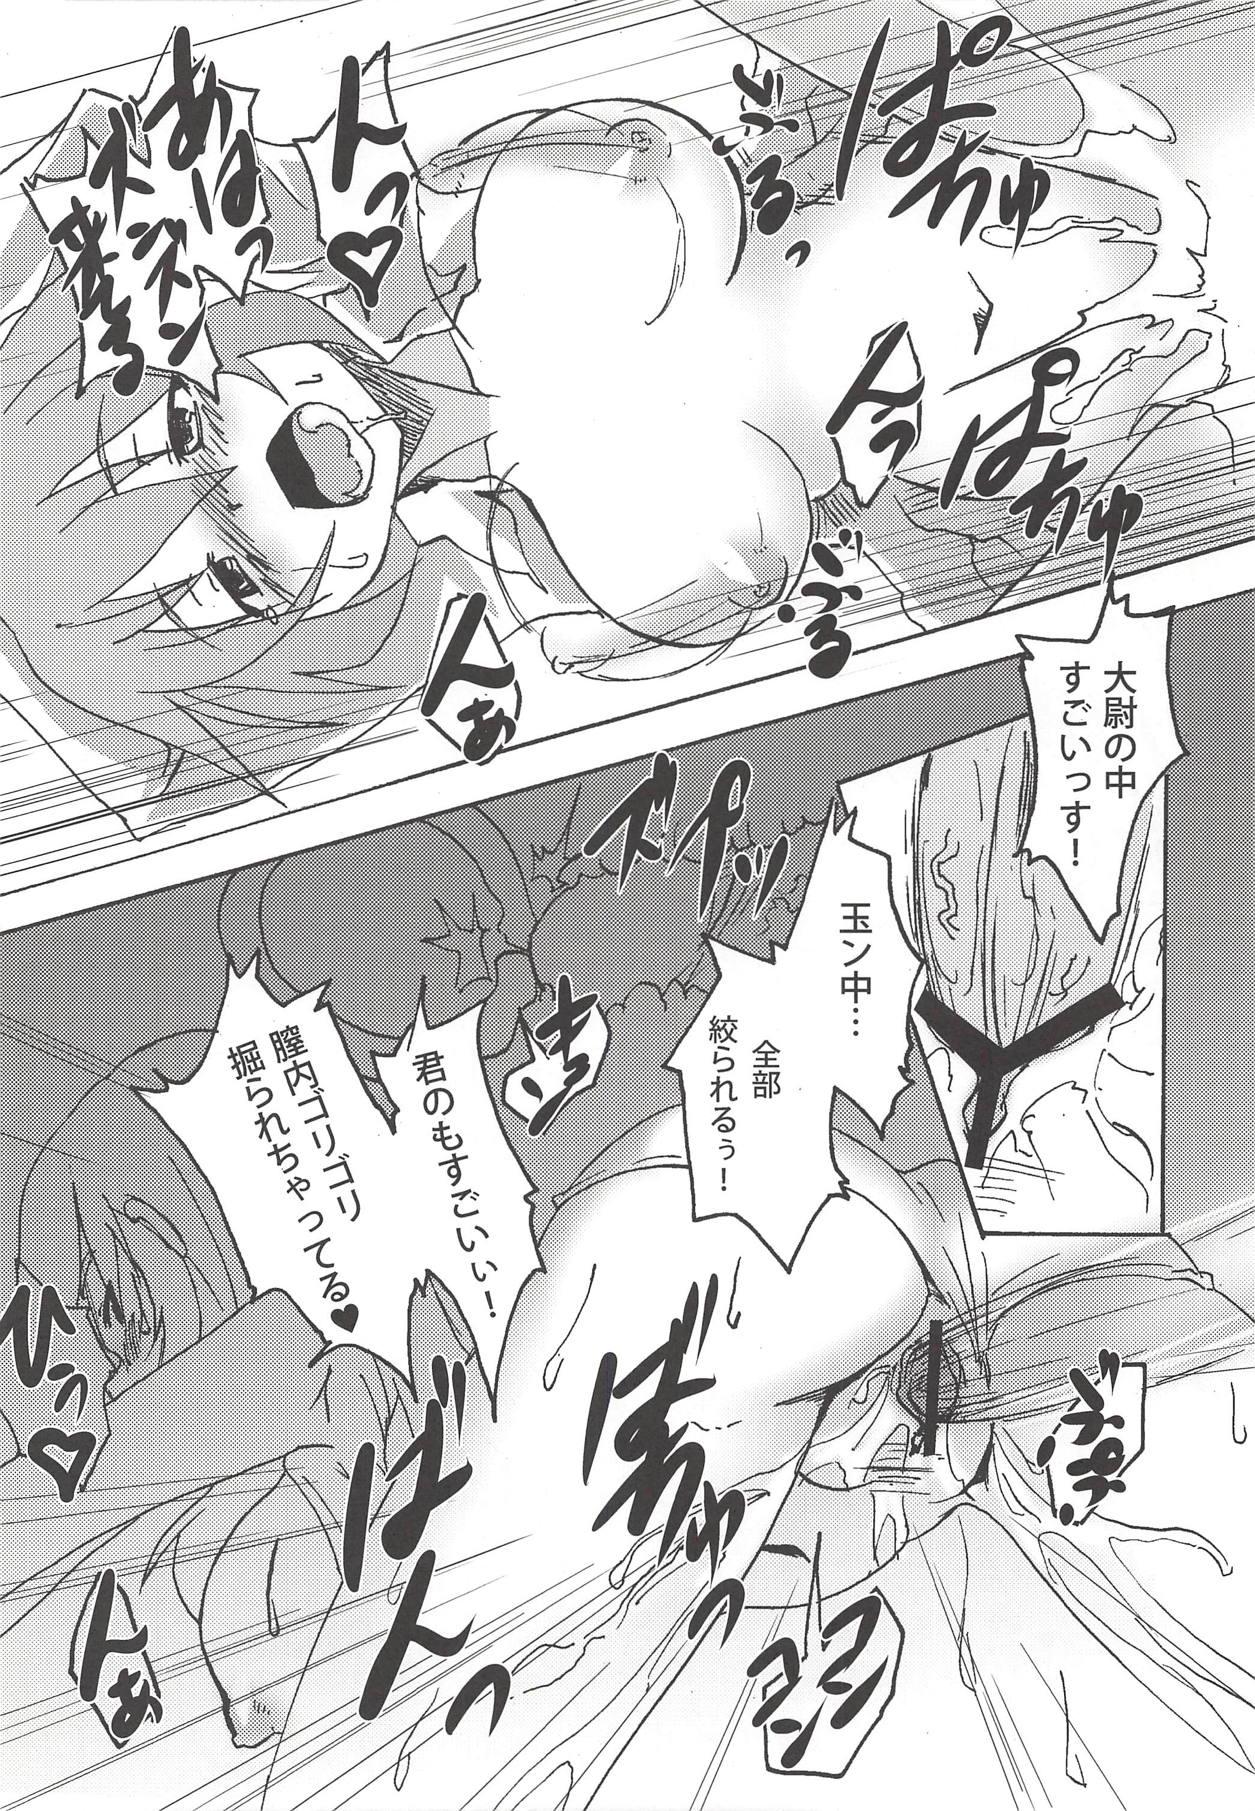 Pregnant Glamorous Days - Strike witches Dicksucking - Page 7